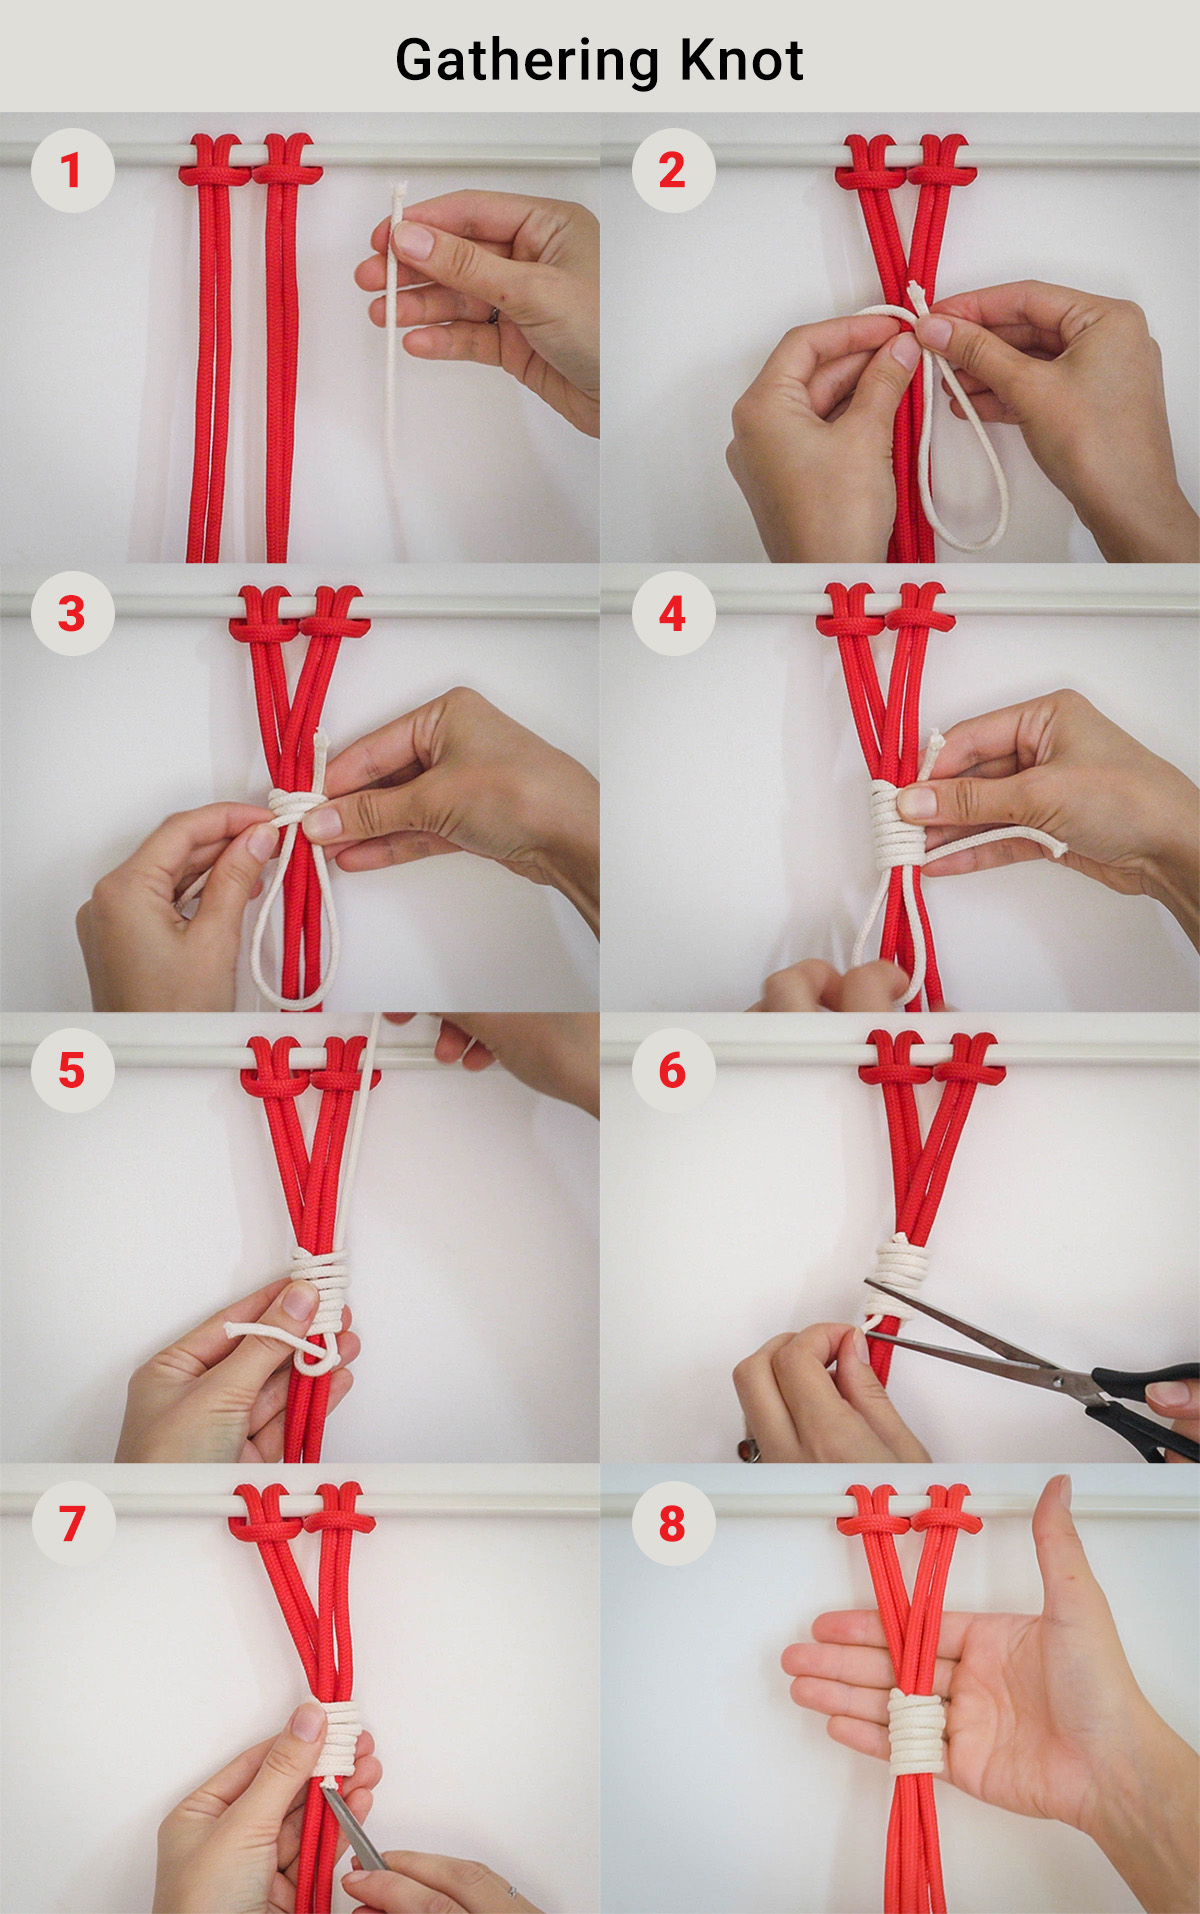 How to Tie the Gathering (Wrapping) Knot